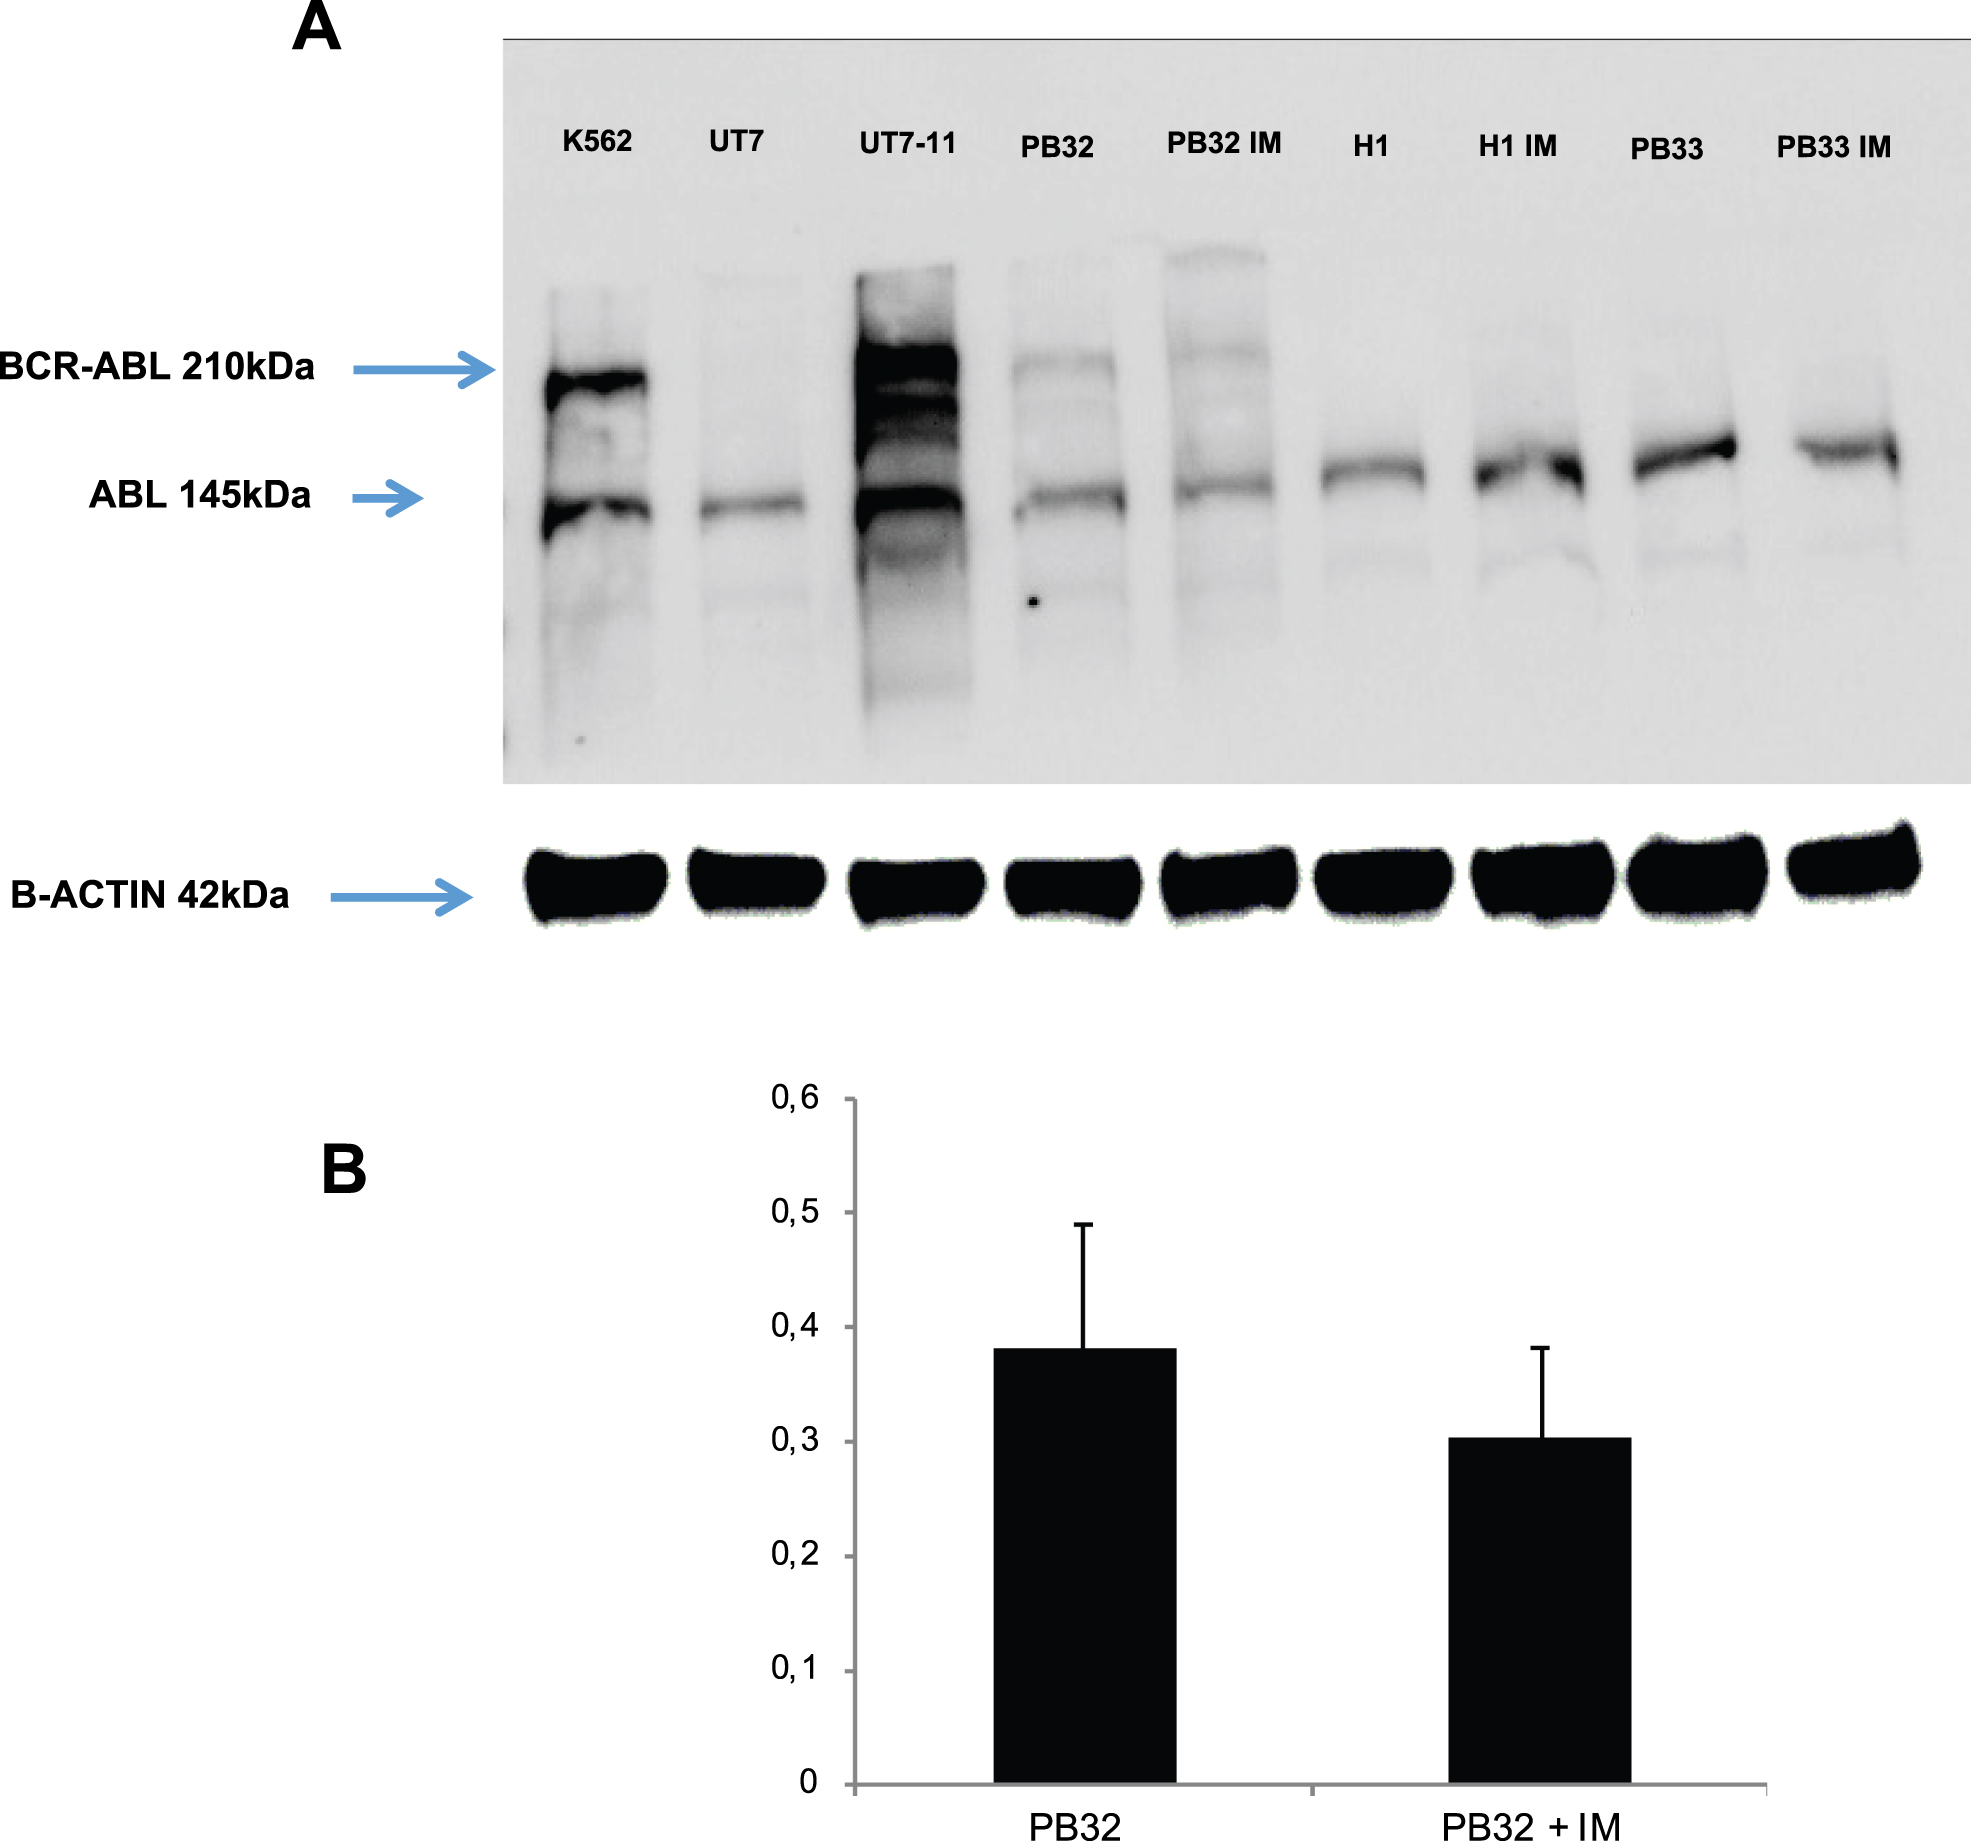 (A) Western blot analysis for the evaluation of BCR-ABL expression in CML iPSC line PB32 as compared to control cell lines. Lane 1: BCR-ABL expressing K562 cell line; Lane 2: Control UT7 cell line; lane 3.:UT7-11 cell line expressing BCR-ABL; Lane 4 and 5: CML IPSC line PB32 before and after exposure to Imatinib (PB32-IM); (lane 6 to 9): control hESC line H1 and control IPS cell line PB33 before and after exposure to imatinib. (B) Expression of BCR-ABL in CML IPS PB32 by RT-q-PCR before and after exposure to Imatinib.